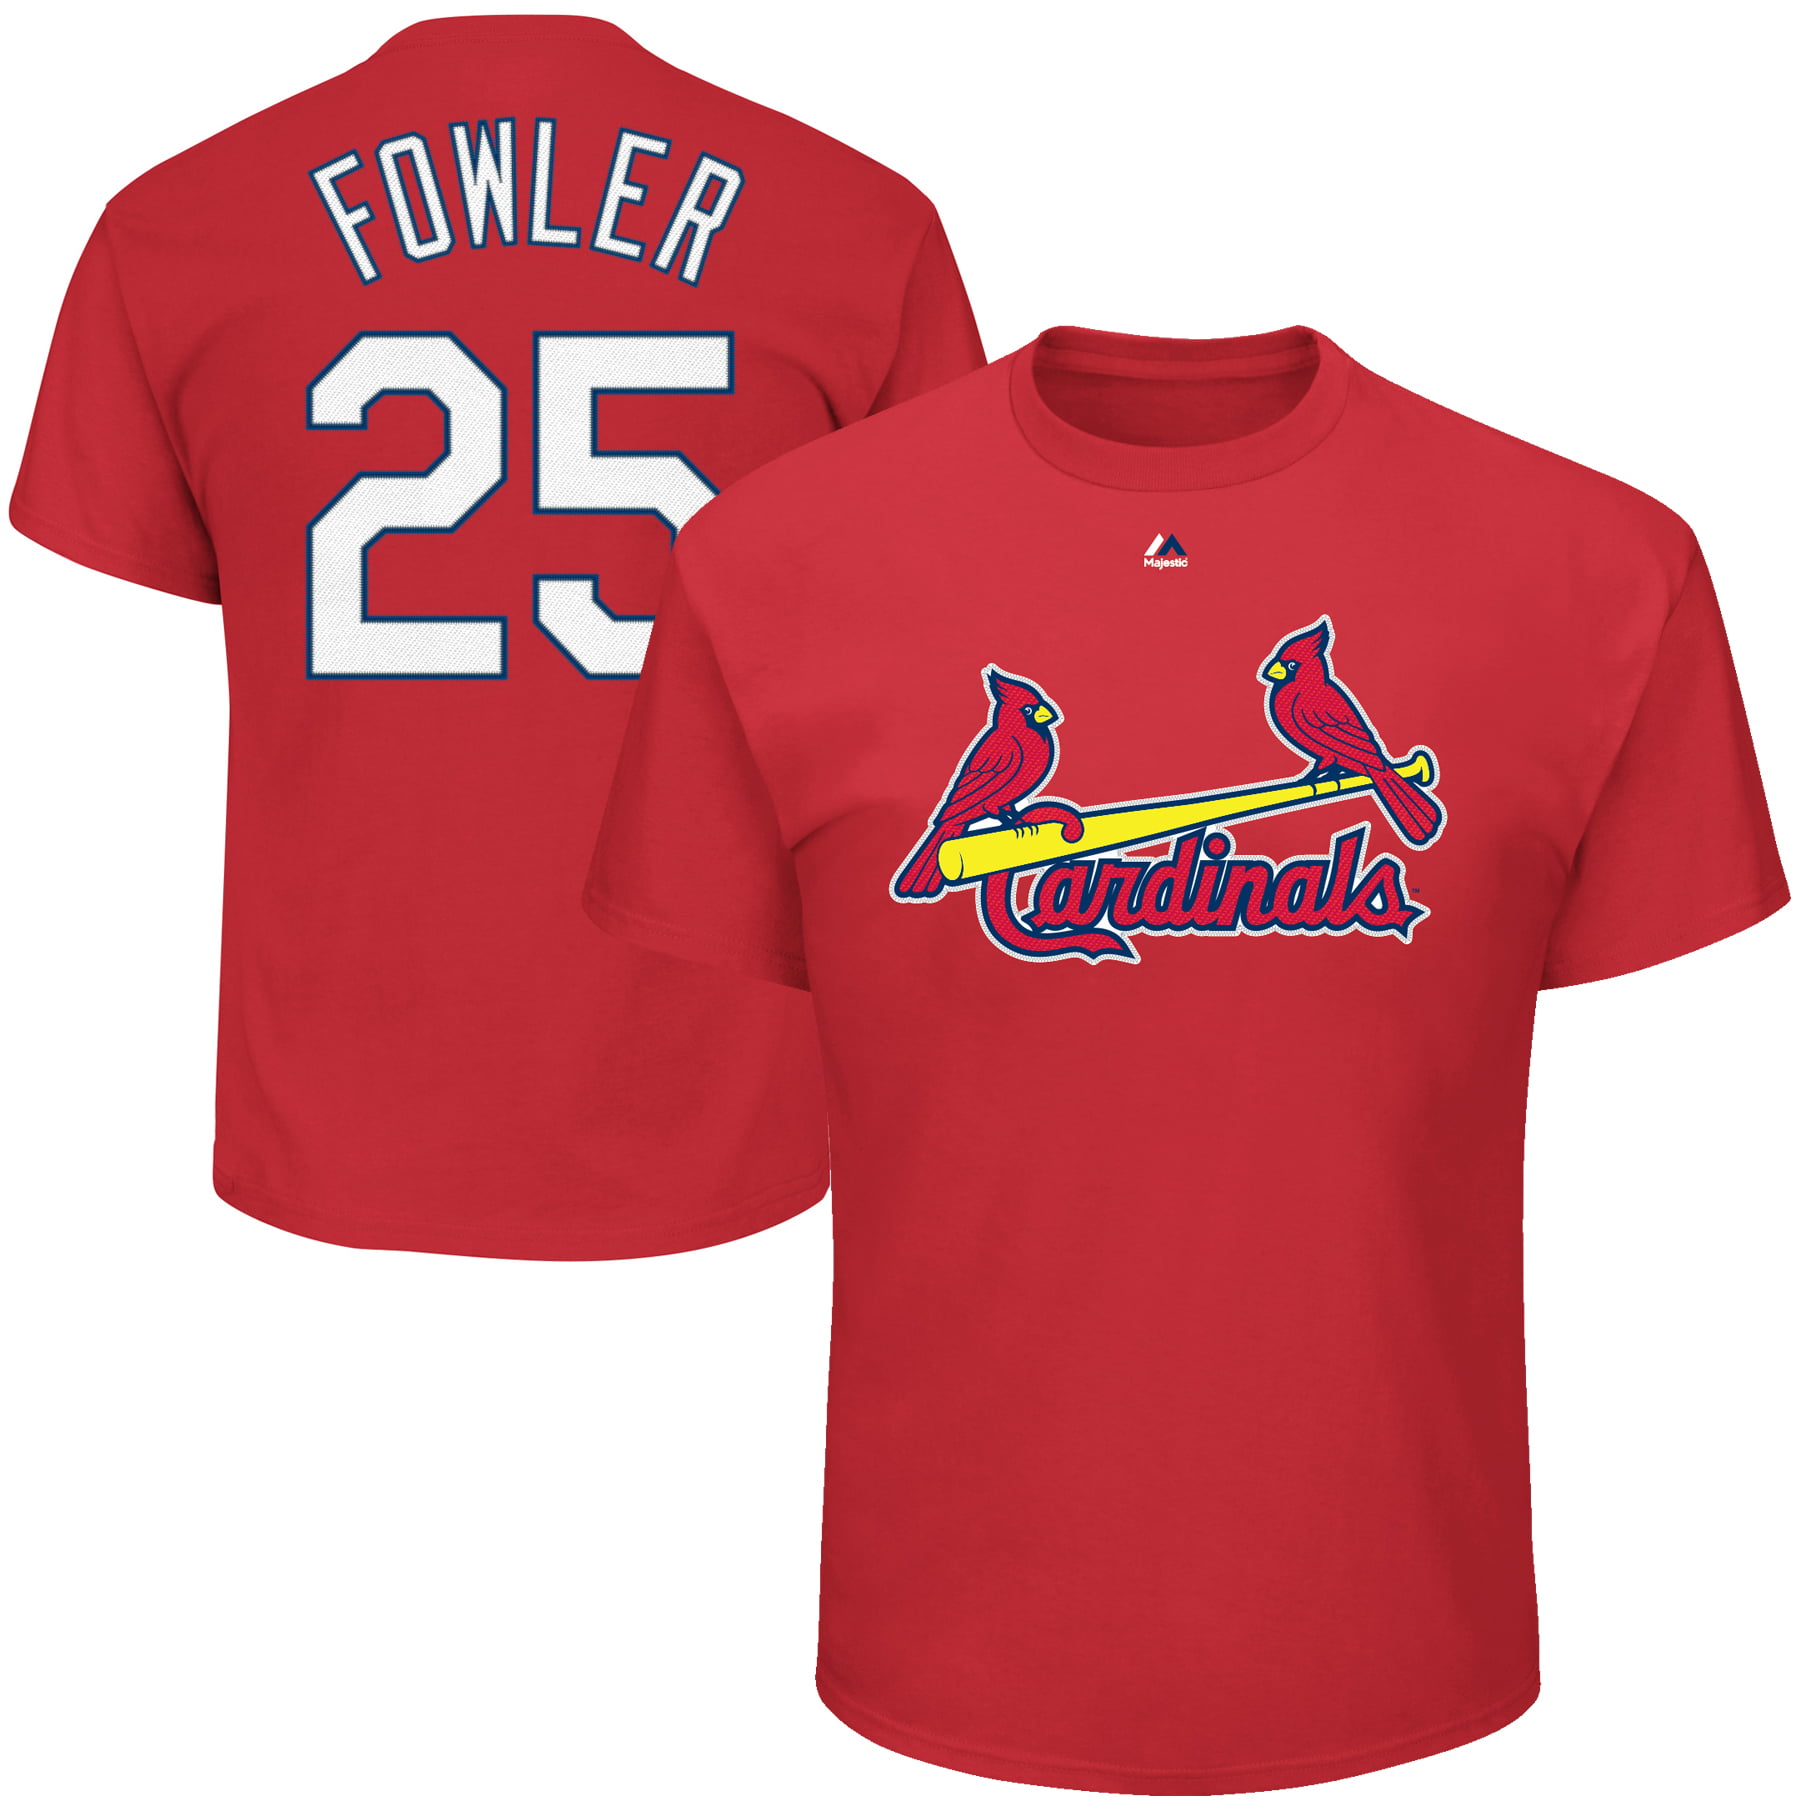 Dexter Fowler St. Louis Cardinals Majestic Name & Number T-Shirt - Red - www.semadata.org